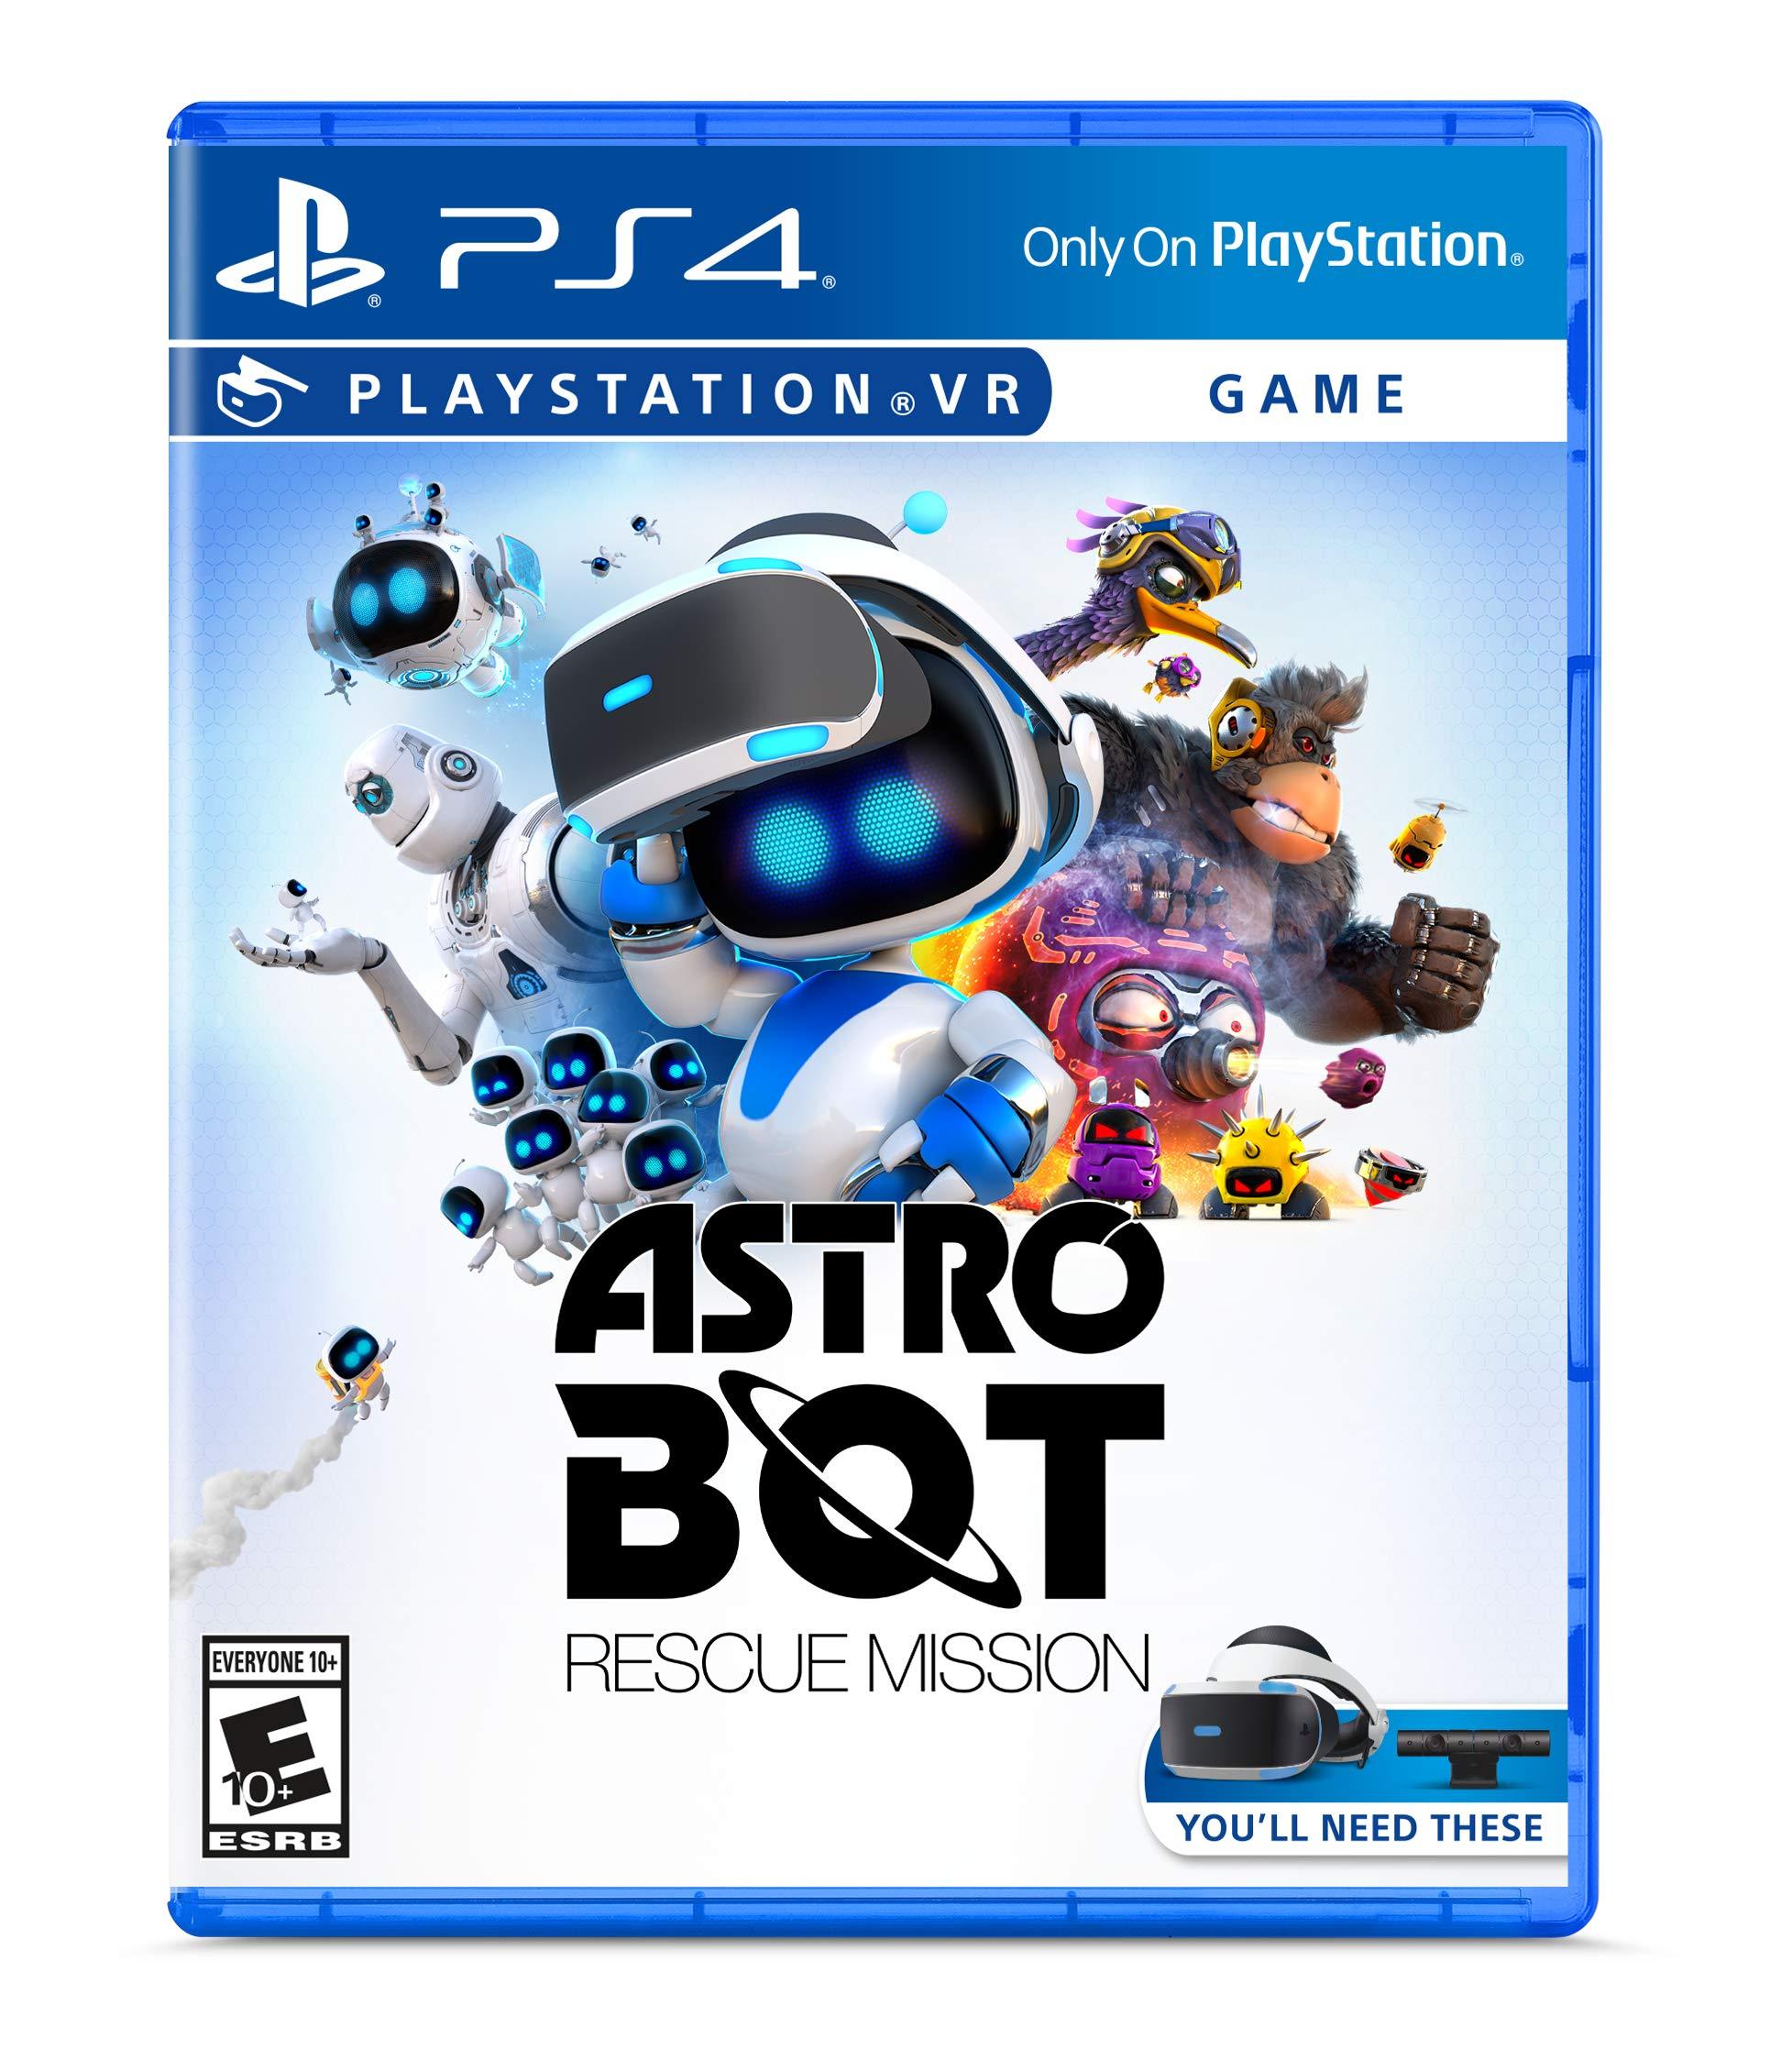 Astro Bot Rescue Mission VR - PlayStation 4 - Want a New Gadget